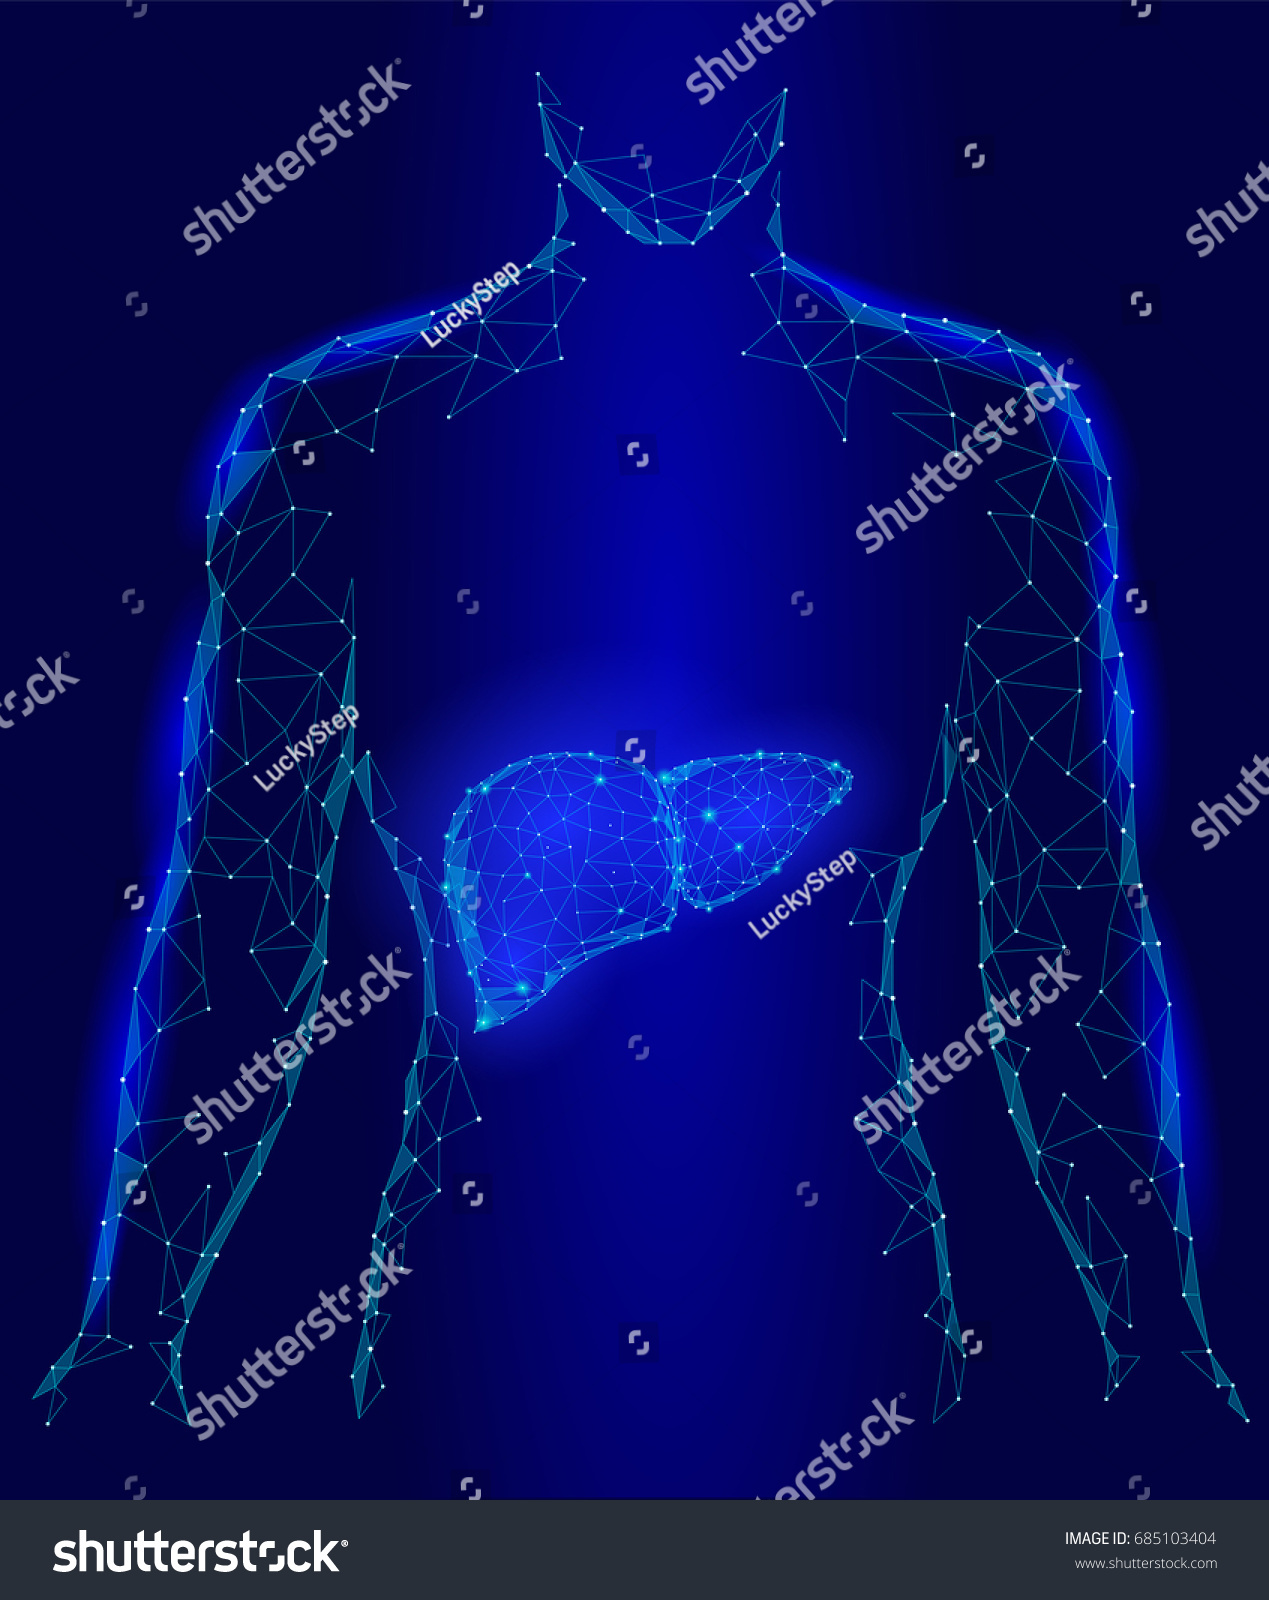 SVG of Treatment regeneration decay Human Liver Internal Organ Triangle Low Poly. Connected dots blue color technology 3d model medicine healthy body part vector illustration svg